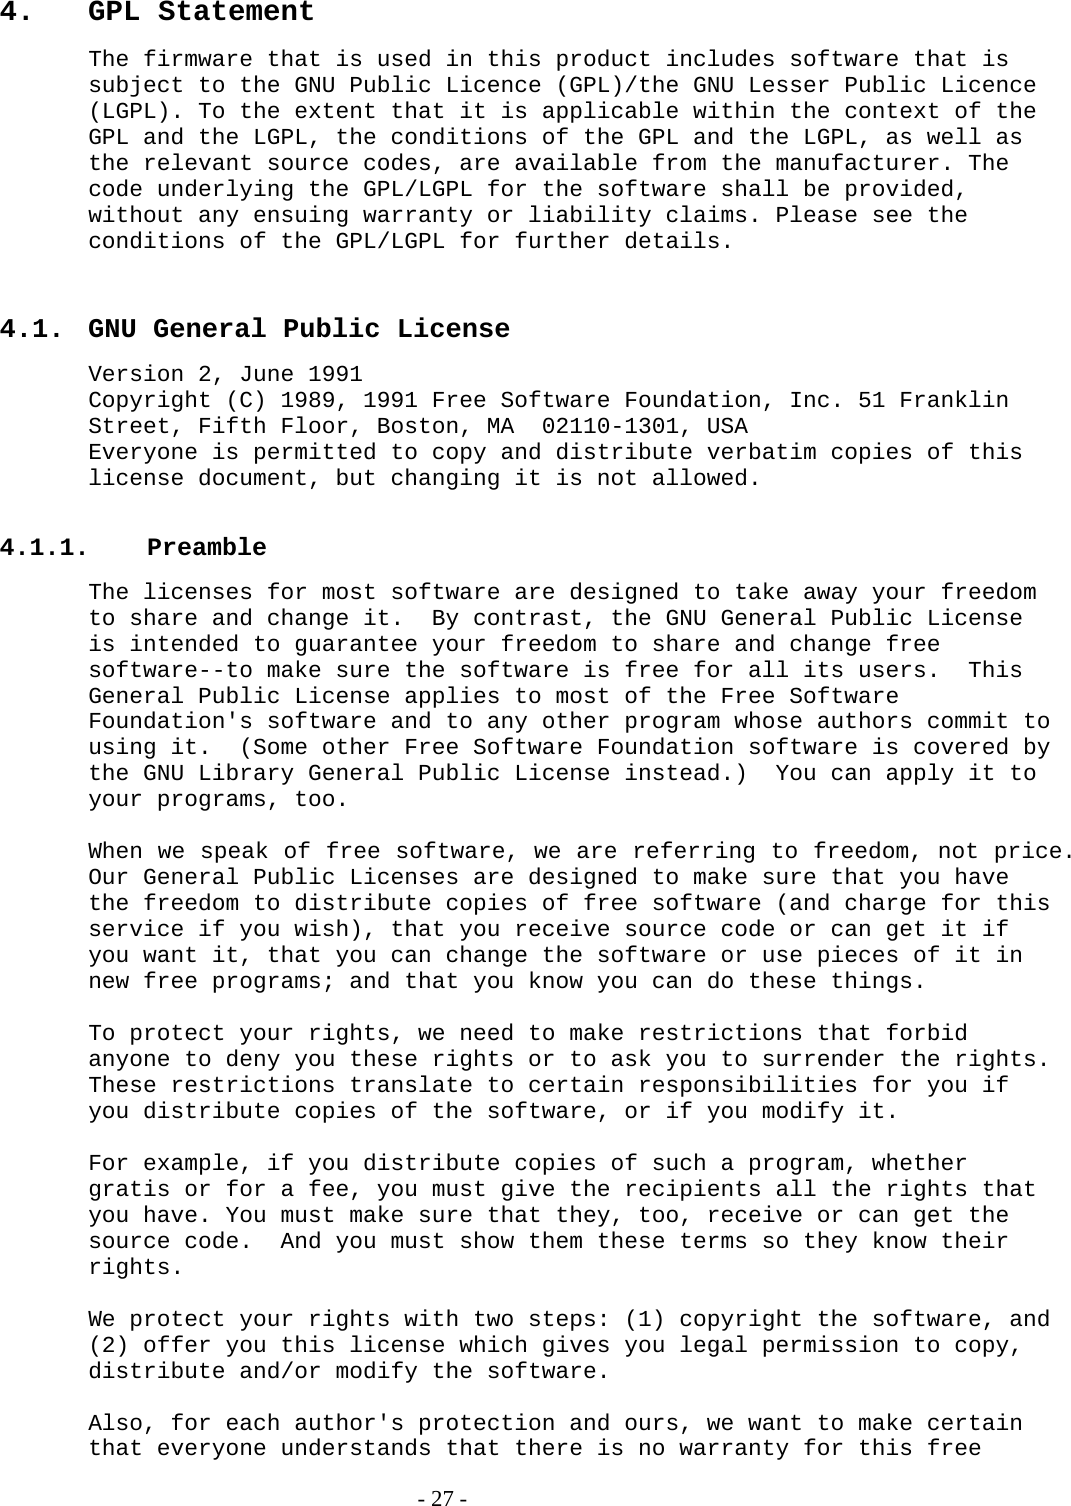 4. GPL Statement The firmware that is used in this product includes software that is subject to the GNU Public Licence (GPL)/the GNU Lesser Public Licence (LGPL). To the extent that it is applicable within the context of the GPL and the LGPL, the conditions of the GPL and the LGPL, as well as the relevant source codes, are available from the manufacturer. The code underlying the GPL/LGPL for the software shall be provided, without any ensuing warranty or liability claims. Please see the conditions of the GPL/LGPL for further details.  4.1.  GNU General Public License Version 2, June 1991 Copyright (C) 1989, 1991 Free Software Foundation, Inc. 51 Franklin Street, Fifth Floor, Boston, MA  02110-1301, USA Everyone is permitted to copy and distribute verbatim copies of this license document, but changing it is not allowed.  4.1.1. Preamble The licenses for most software are designed to take away your freedom to share and change it.  By contrast, the GNU General Public License is intended to guarantee your freedom to share and change free software--to make sure the software is free for all its users.  This General Public License applies to most of the Free Software Foundation&apos;s software and to any other program whose authors commit to using it.  (Some other Free Software Foundation software is covered by the GNU Library General Public License instead.)  You can apply it to your programs, too.  When we speak of free software, we are referring to freedom, not price.  Our General Public Licenses are designed to make sure that you have the freedom to distribute copies of free software (and charge for this service if you wish), that you receive source code or can get it if you want it, that you can change the software or use pieces of it in new free programs; and that you know you can do these things.  To protect your rights, we need to make restrictions that forbid anyone to deny you these rights or to ask you to surrender the rights. These restrictions translate to certain responsibilities for you if you distribute copies of the software, or if you modify it.  For example, if you distribute copies of such a program, whether gratis or for a fee, you must give the recipients all the rights that you have. You must make sure that they, too, receive or can get the source code.  And you must show them these terms so they know their rights.  We protect your rights with two steps: (1) copyright the software, and (2) offer you this license which gives you legal permission to copy, distribute and/or modify the software.  Also, for each author&apos;s protection and ours, we want to make certain that everyone understands that there is no warranty for this free   - 27 - 